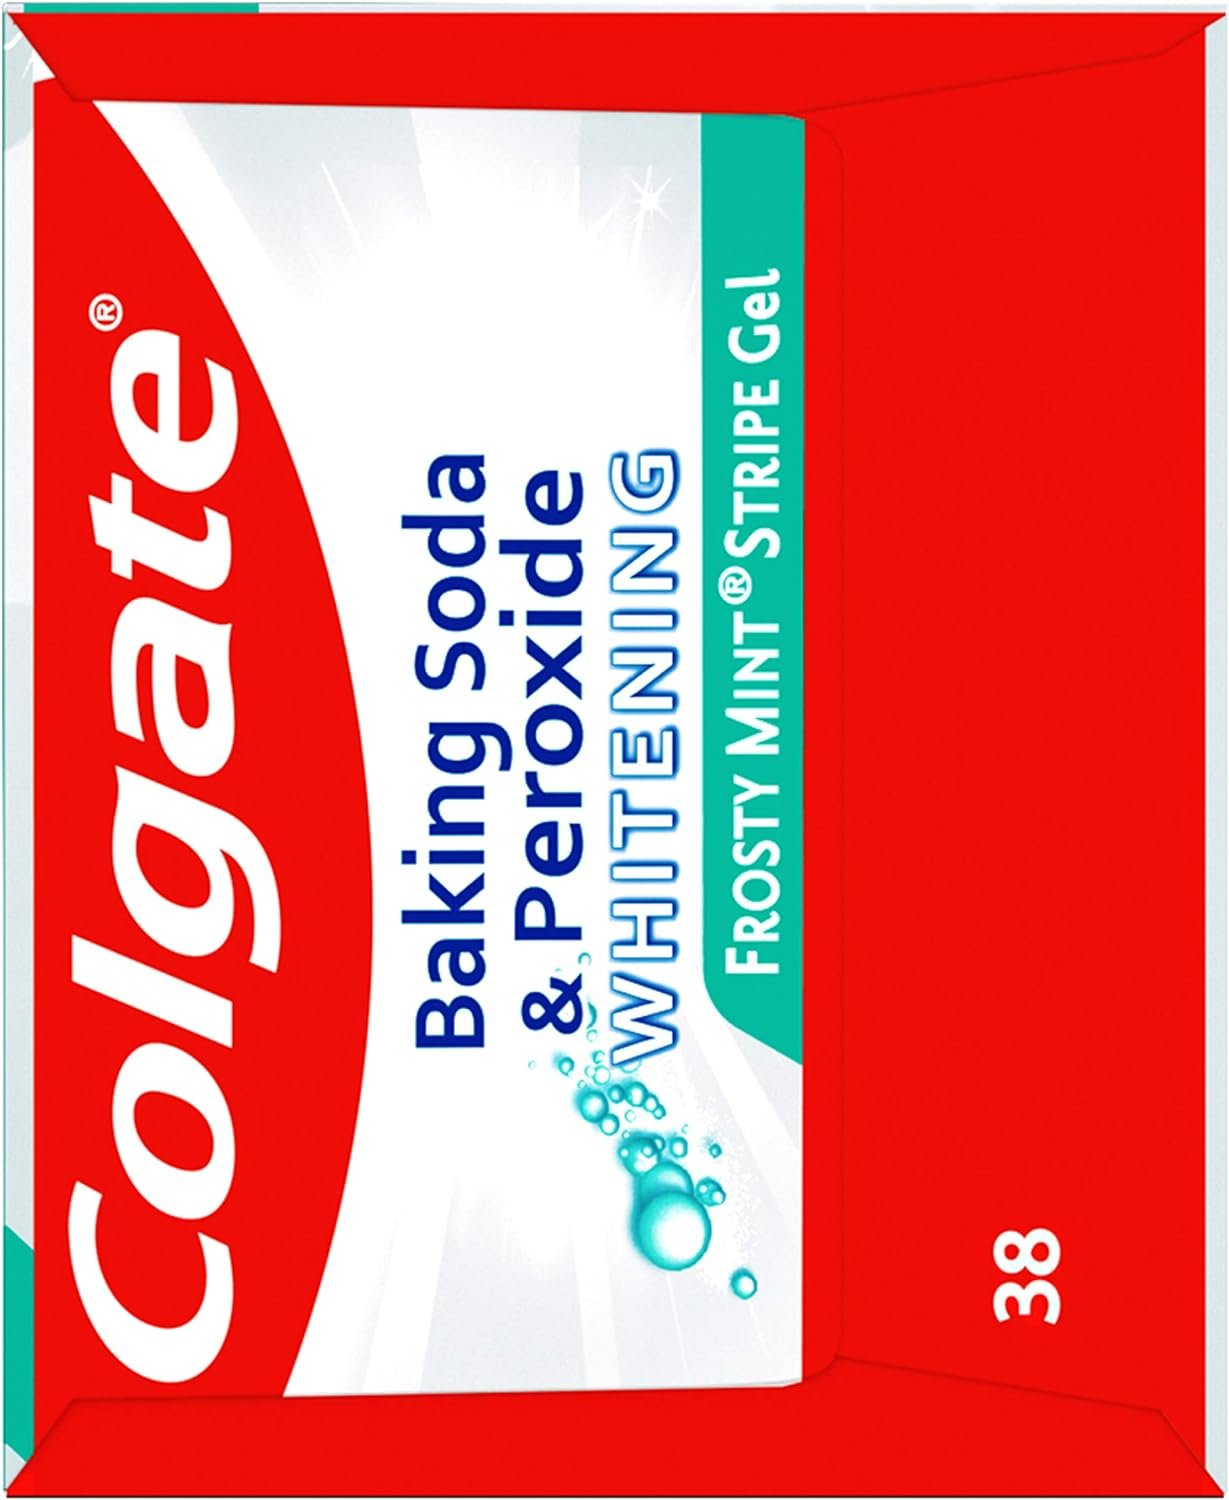 Colgate Baking Soda and Peroxide Whitening Toothpaste, Frosty Mint,6 Ounce (Pack of 6)